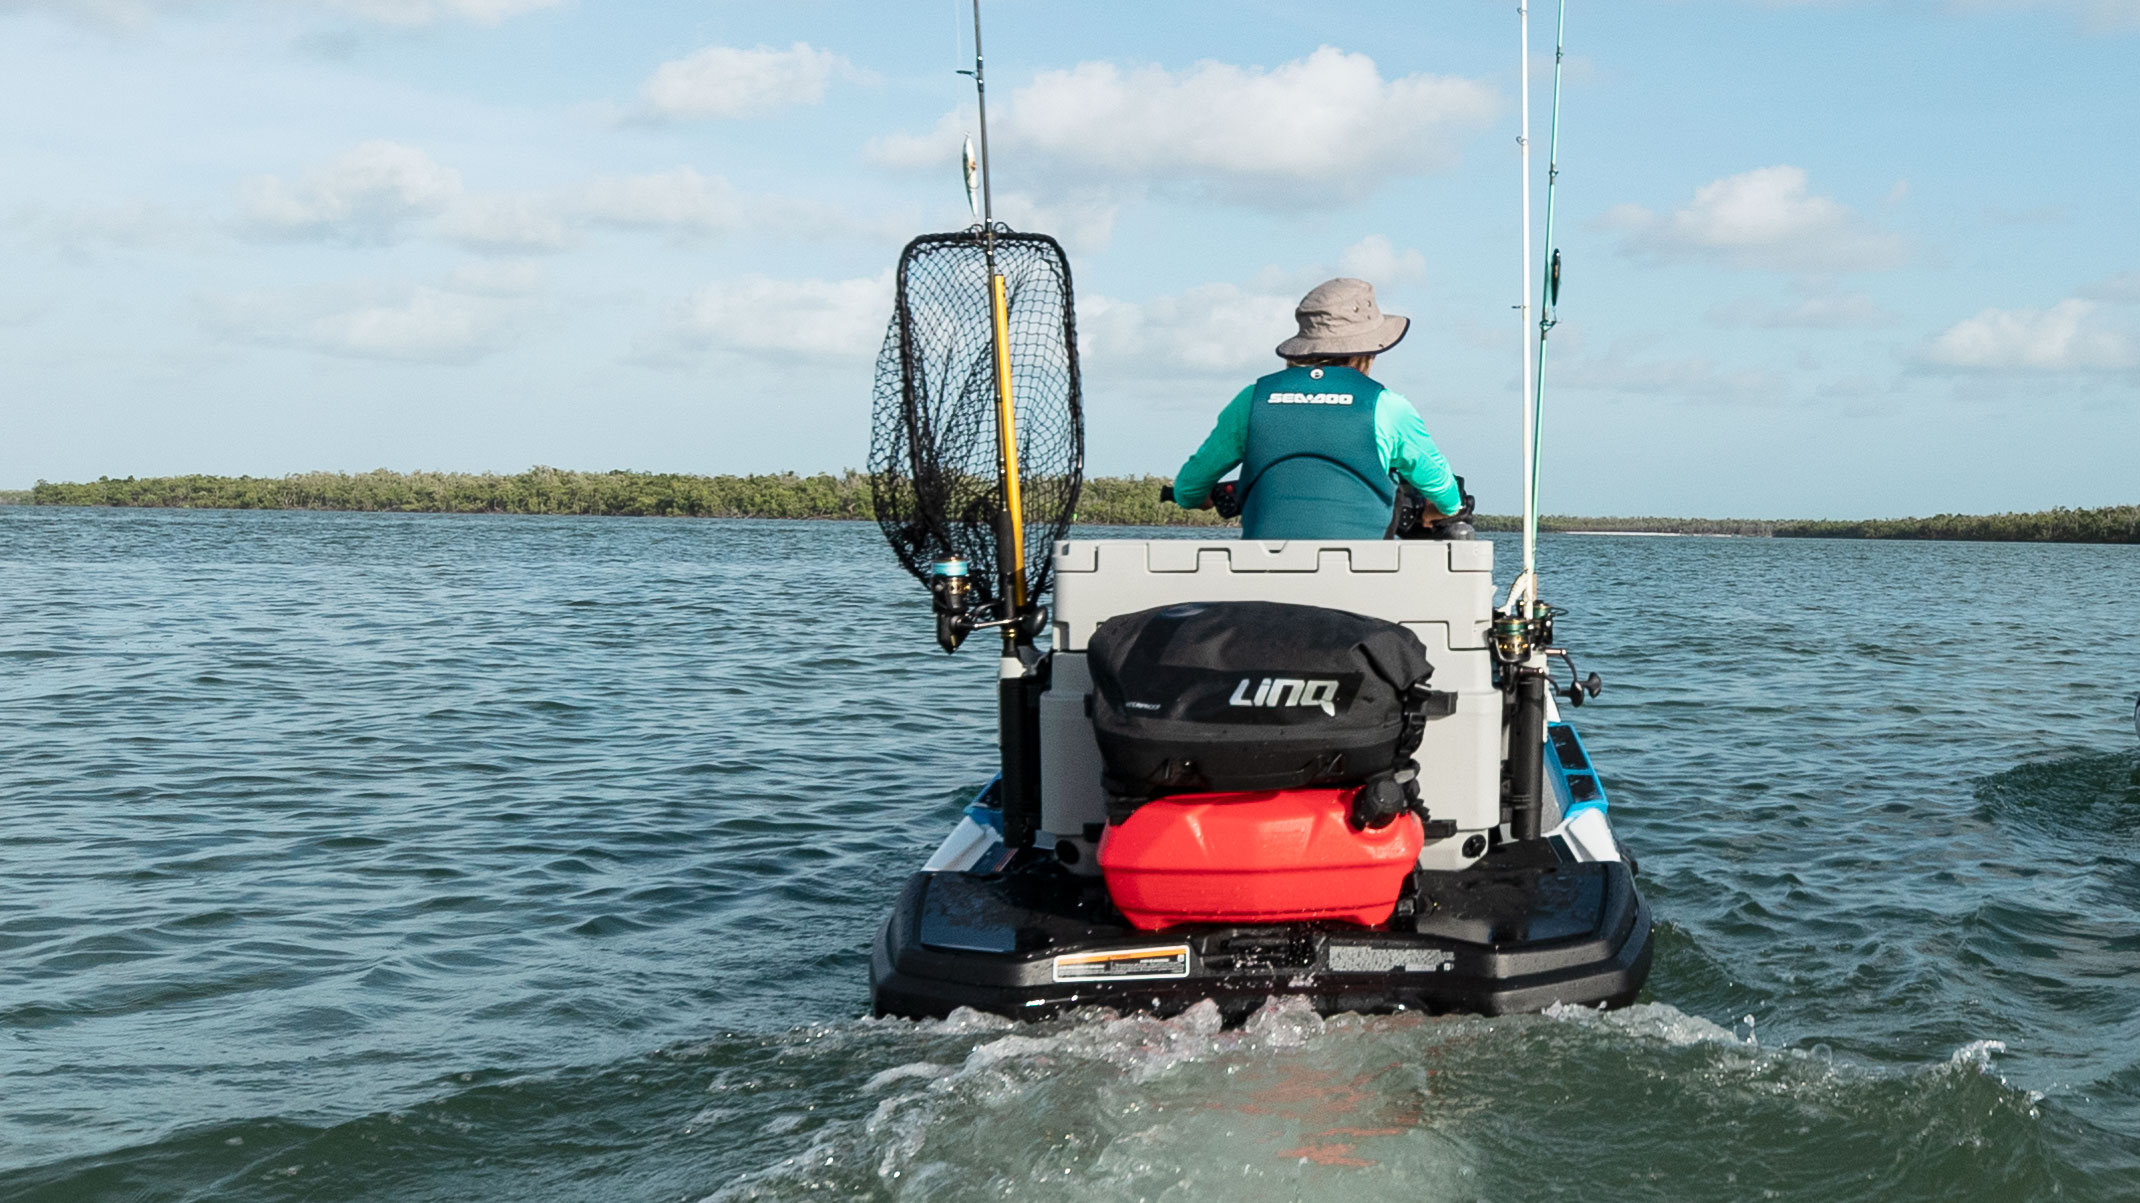 LinQ Accessories on the rear platform of a Sea-Doo FISHPRO